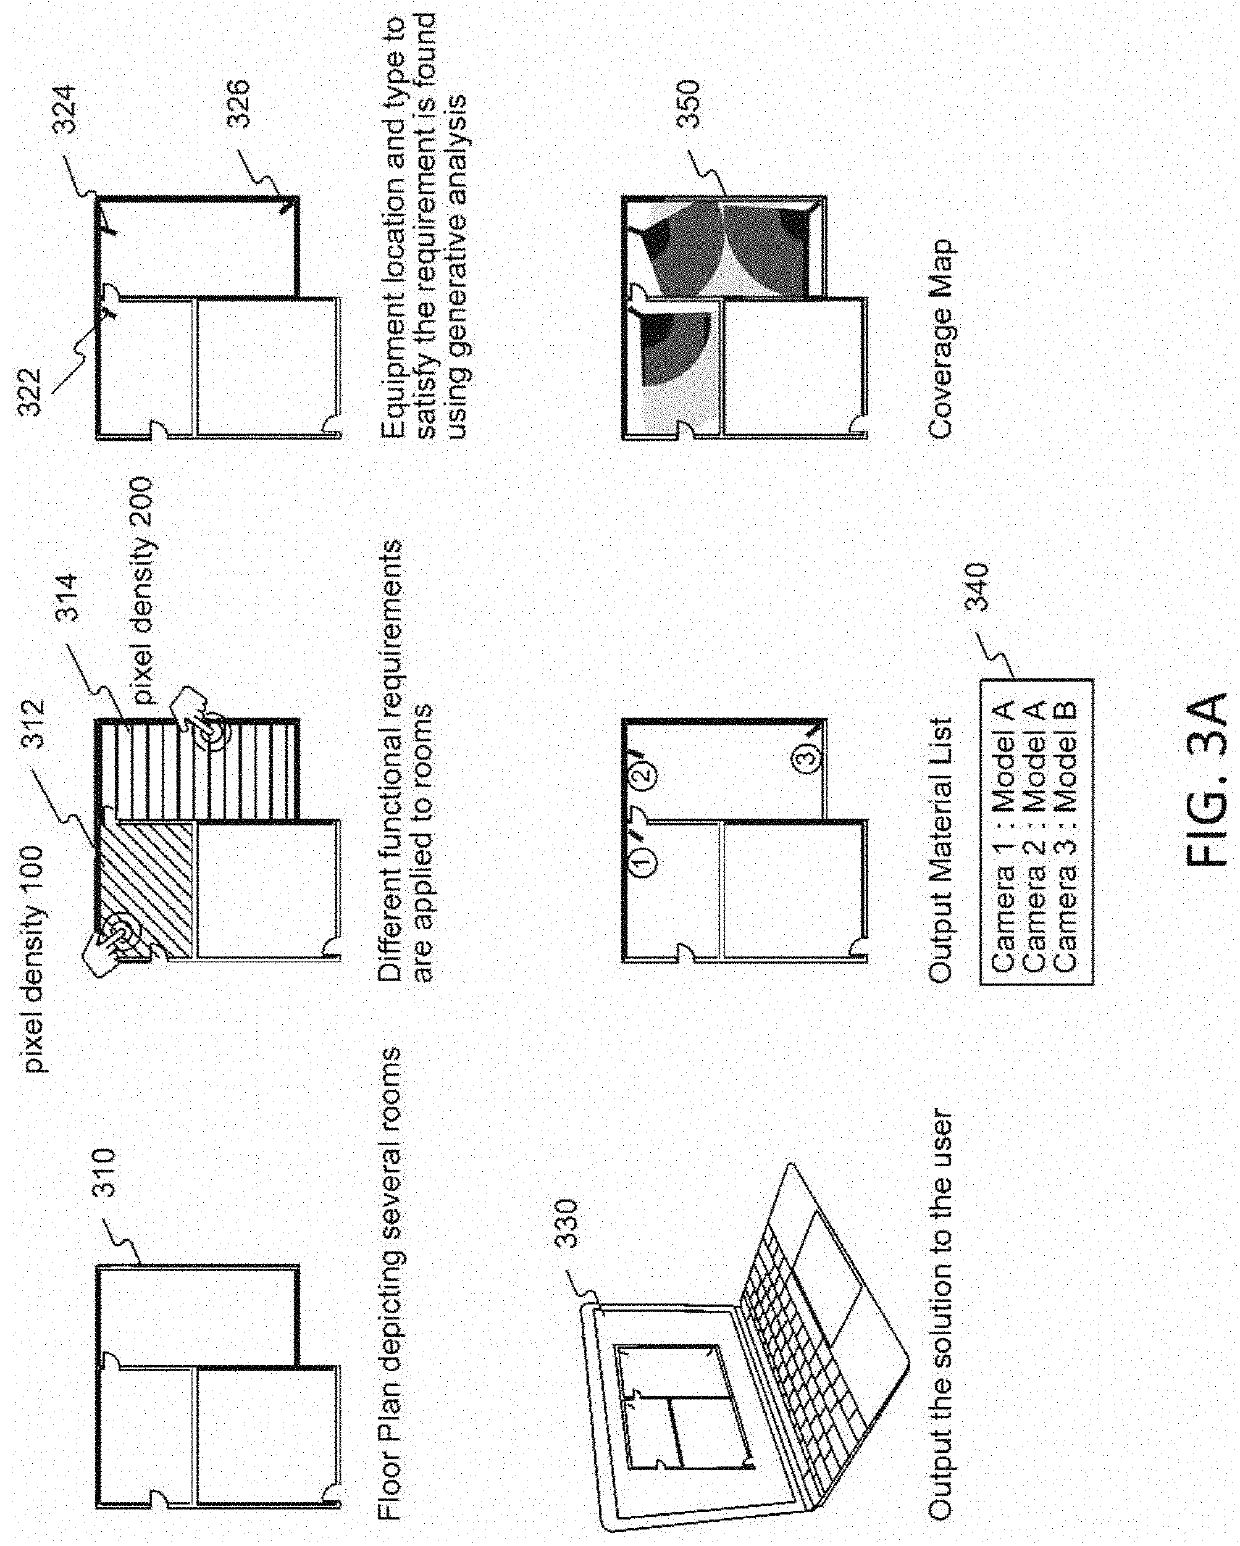 Structural design systems and methods for floor plan simulation and modeling in mass customization of equipment